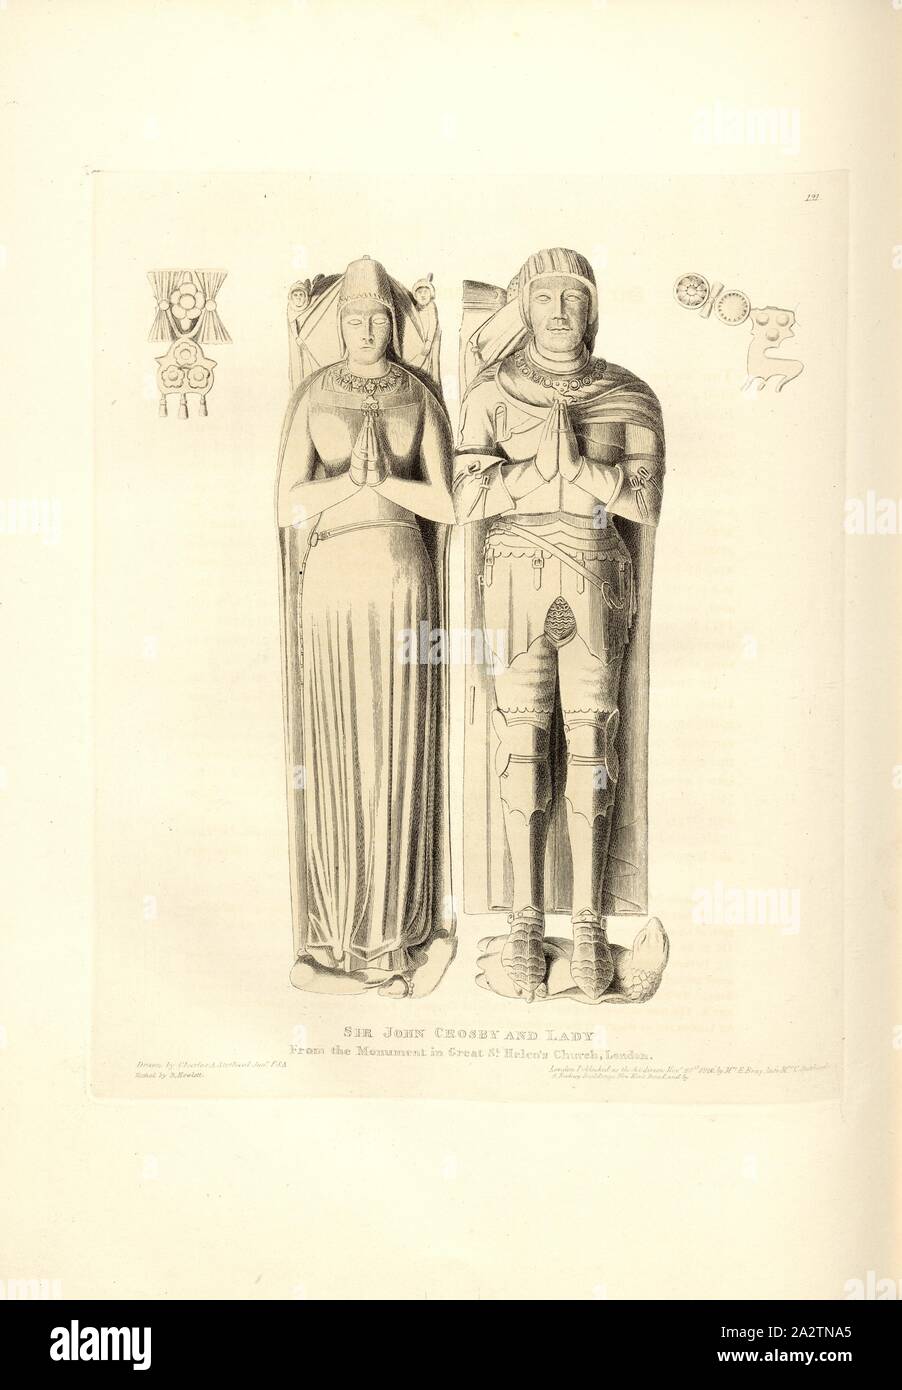 Sir John Crosby and Lady. From the Monument in Great St Helena Church London, Tomb of Sir John Crosby and his wife at St Helen's Church at Bishopsgate, signed: Drawn by Charles A. Stothard; Etched by B. Howlett; Published by Mrs. E. Bray, Fig. 143, 131, after p. 98, Stothard, Charles Alfred (drawn); Howlett, B. (etched); Bray, E. (publ.), Charles Alfred Stothard, Alfred John Kempe: The monumental effigies of Great Britain: selected from our cathedrals and churches, for the purpose of bringing together, and preserving correct representations of the best historical illustrations extant, from the Stock Photo